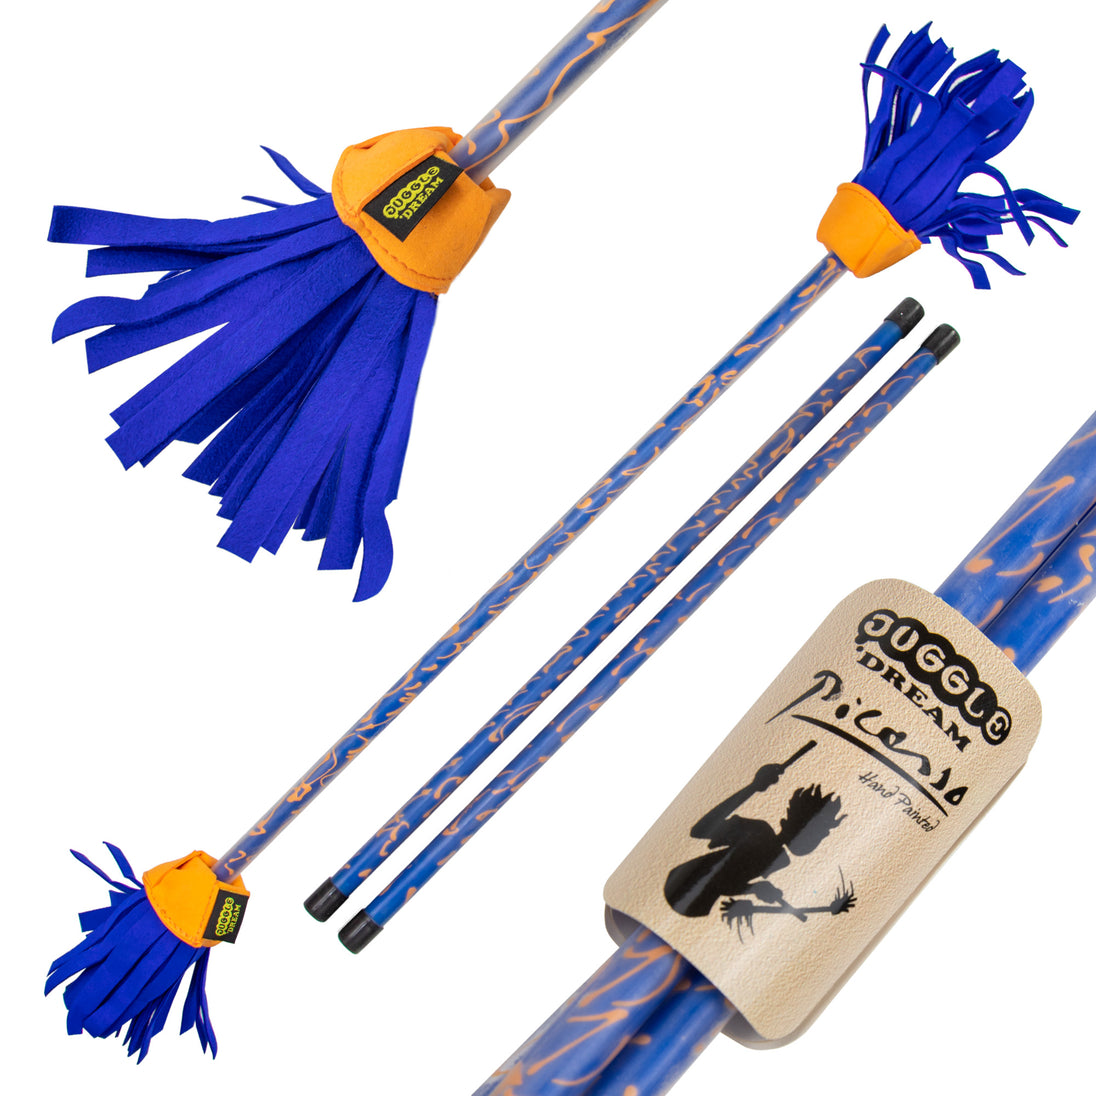 Blue/ Orange full size Picasso Flower Stick with Handsticks with close-up of label and tassels